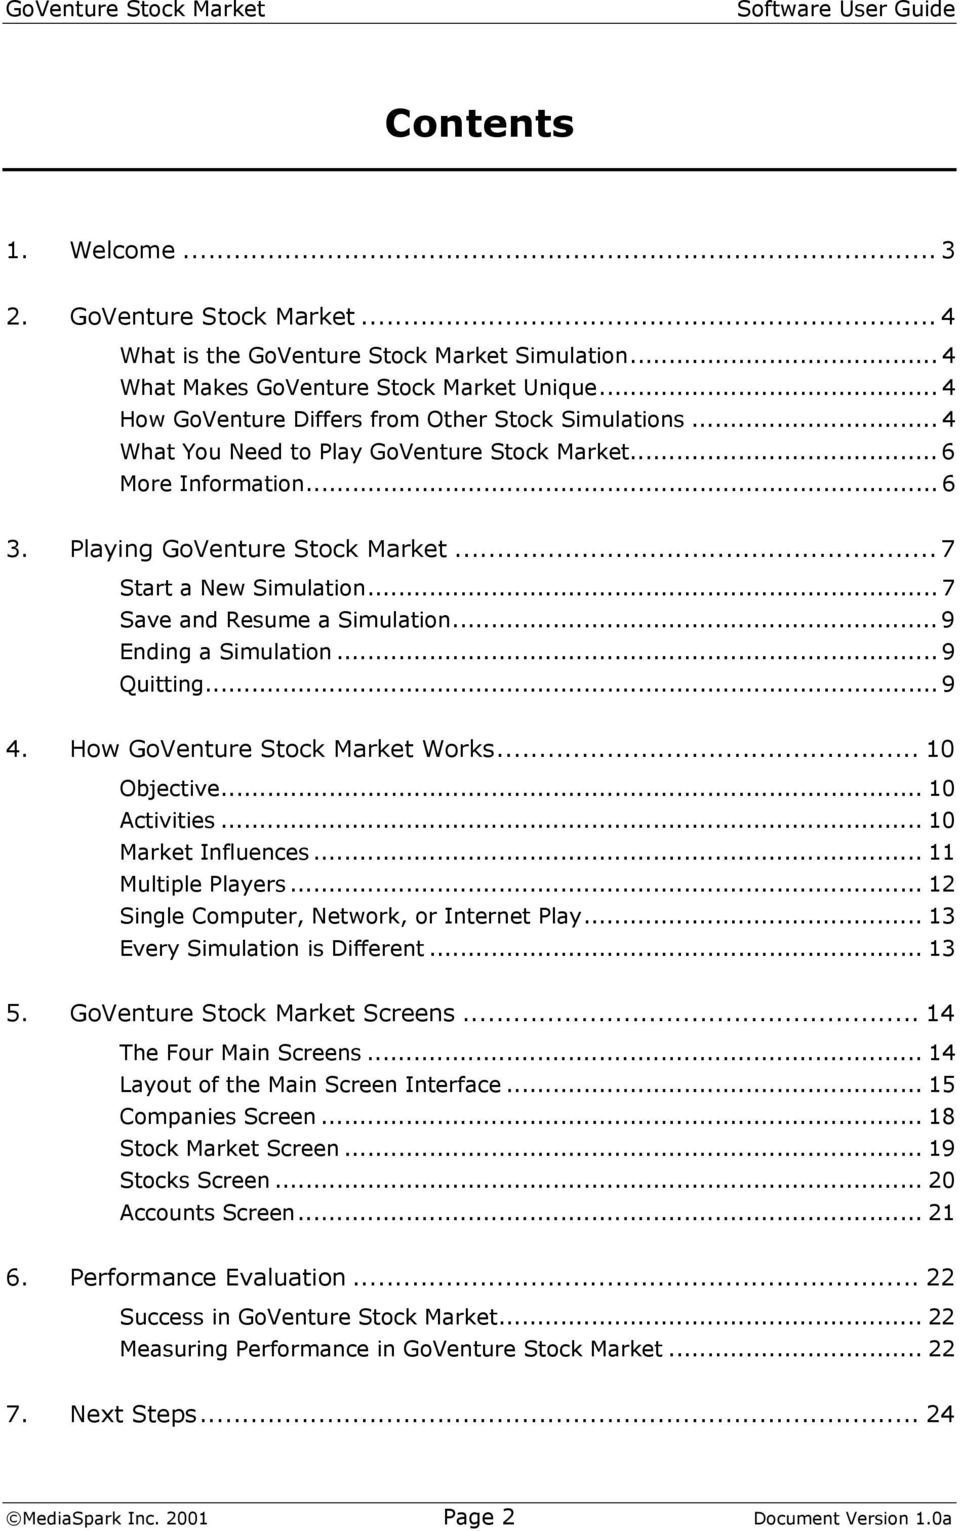 .. 7 Save and Resume a Simulation... 9 Ending a Simulation... 9 Quitting... 9 4. How GoVenture Stock Market Works... 10 Objective... 10 Activities... 10 Market Influences... 11 Multiple Players.